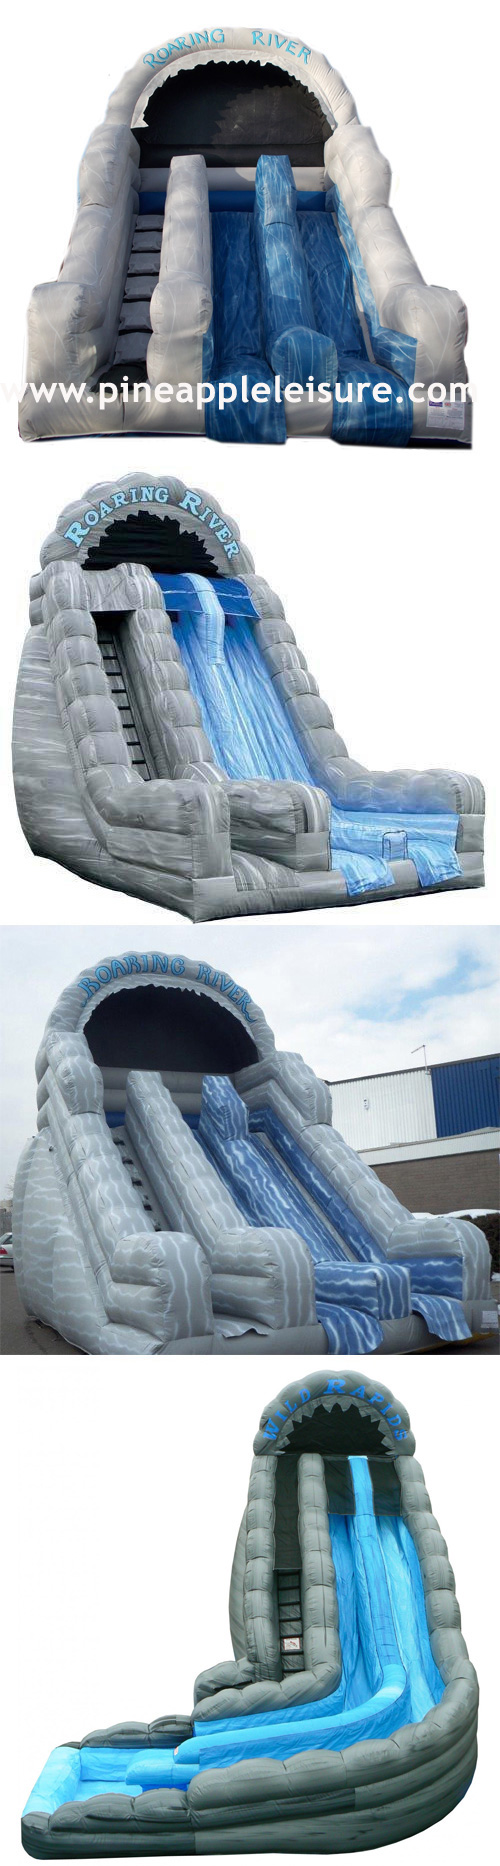 Bouncy Castle Sales - BS36 - Bouncy Inflatable for sale